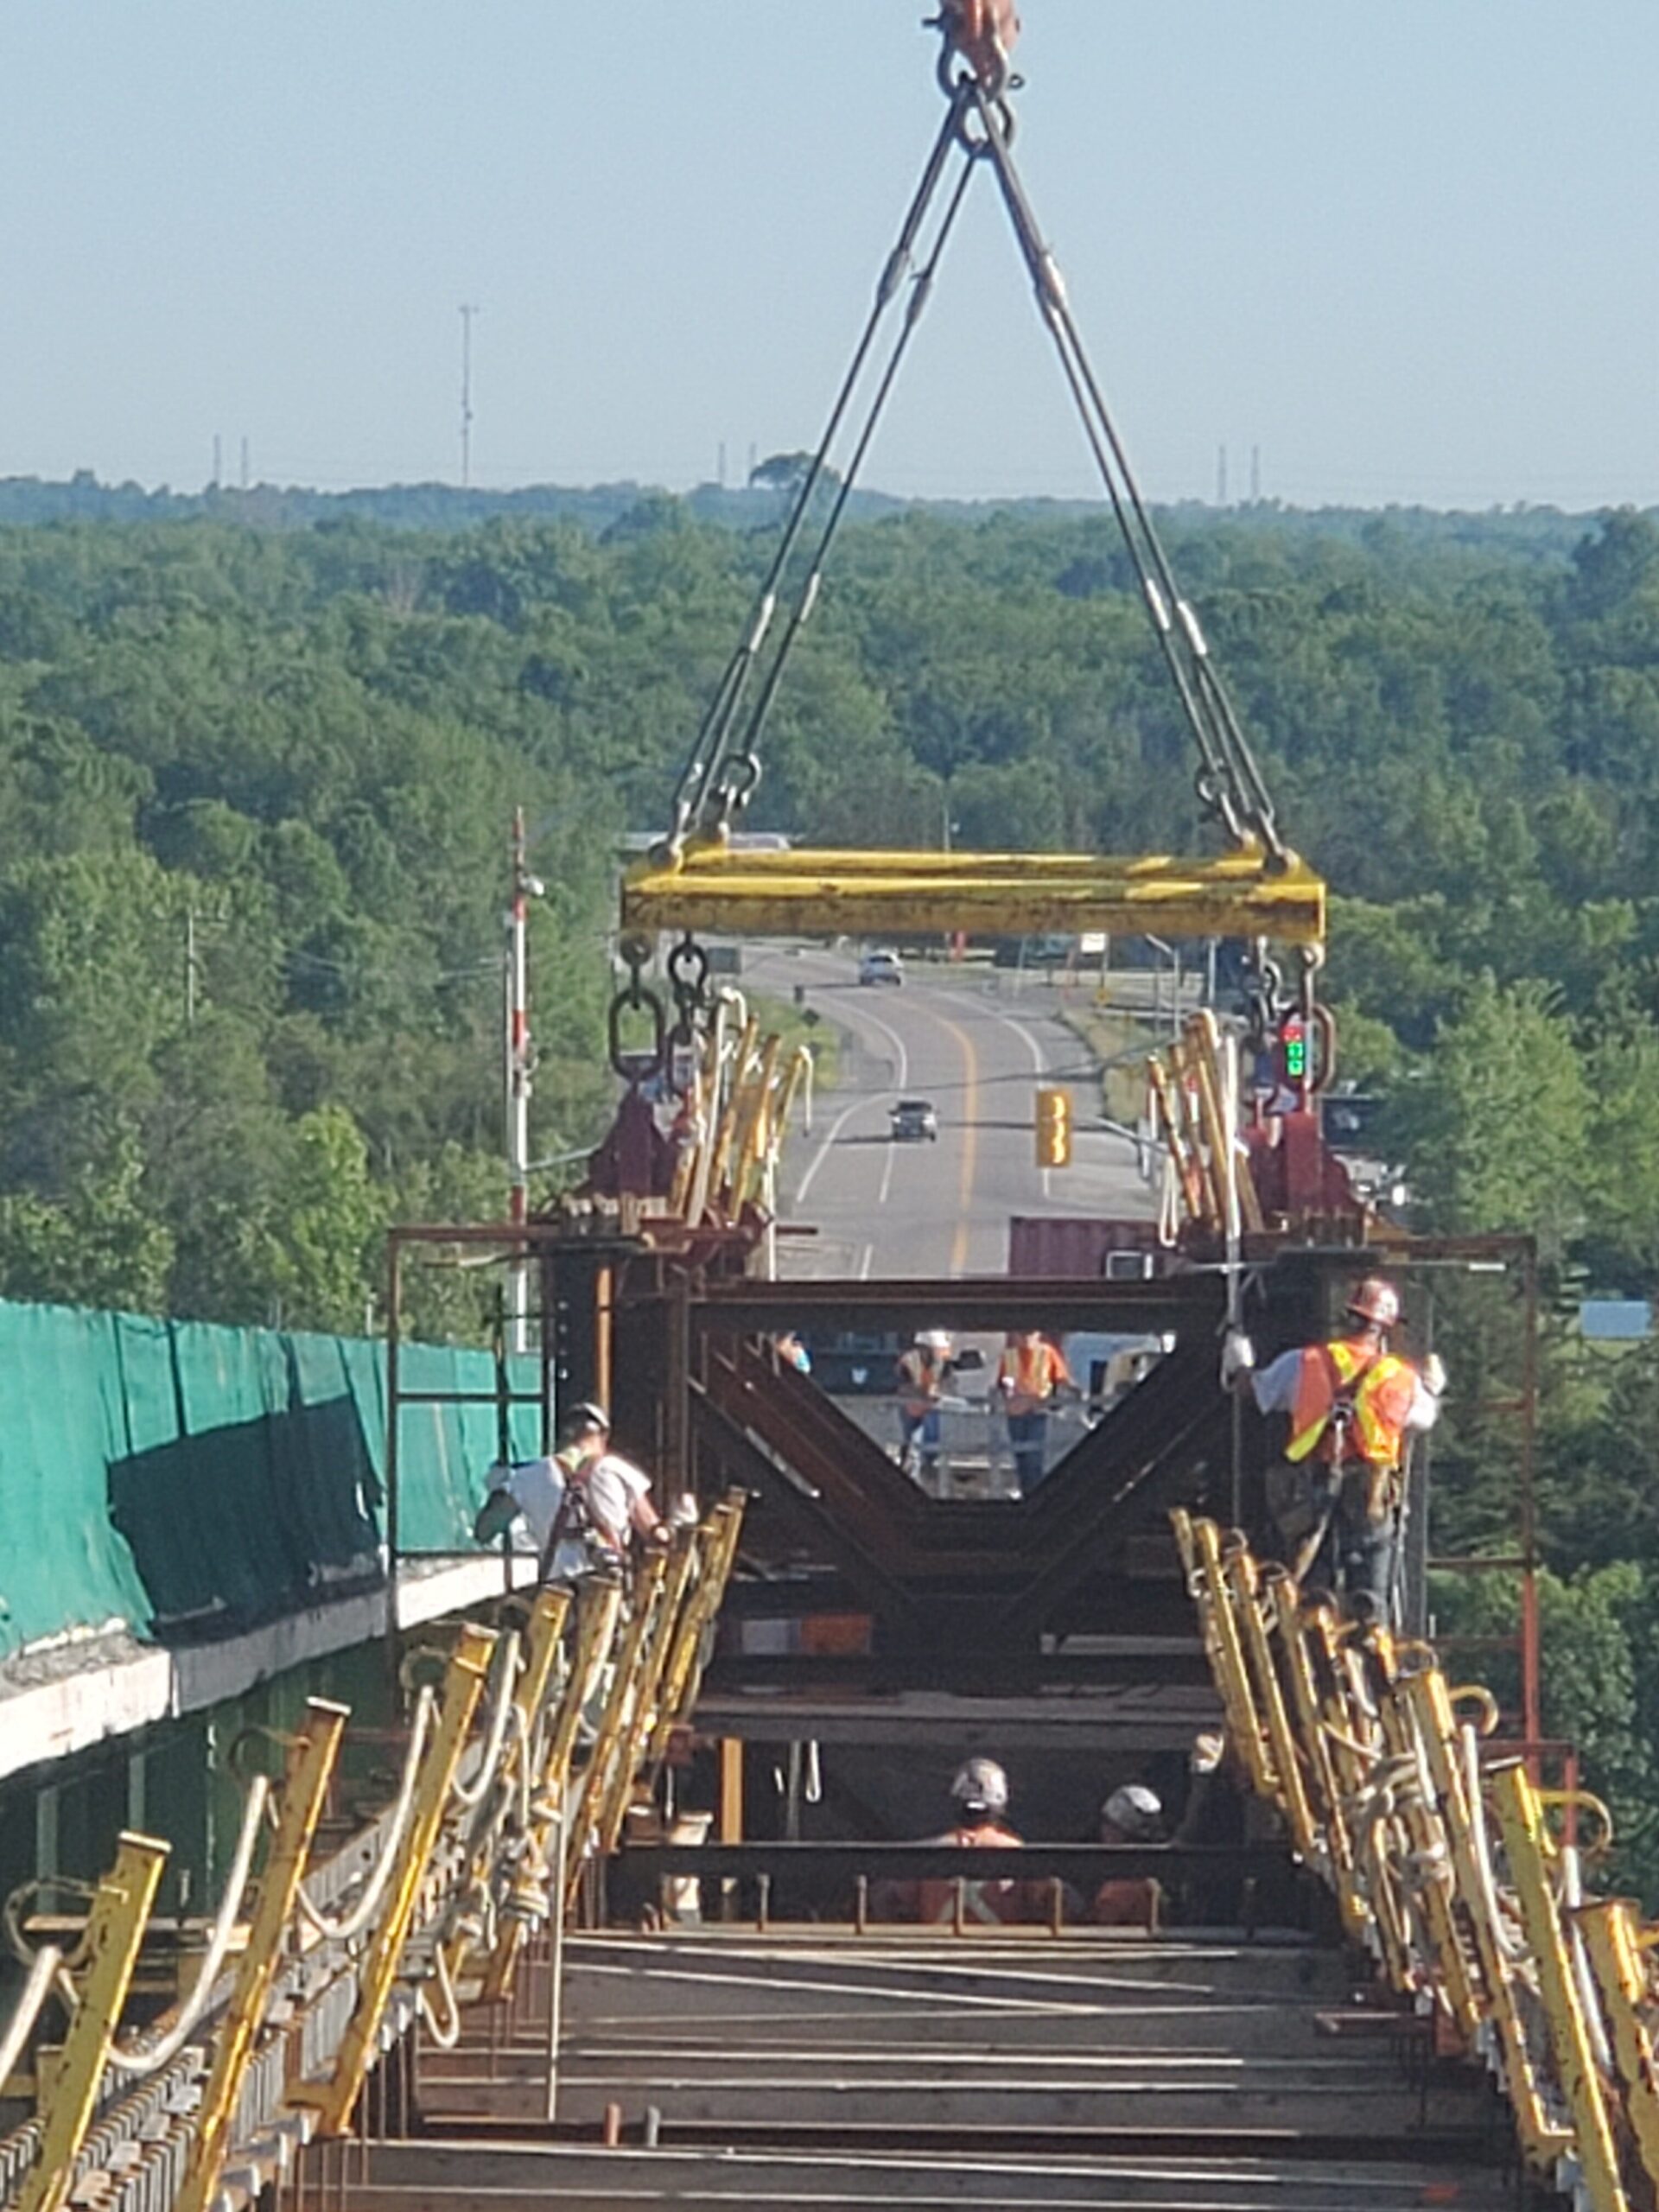 Deck view of the drop-in girder being lowered into place